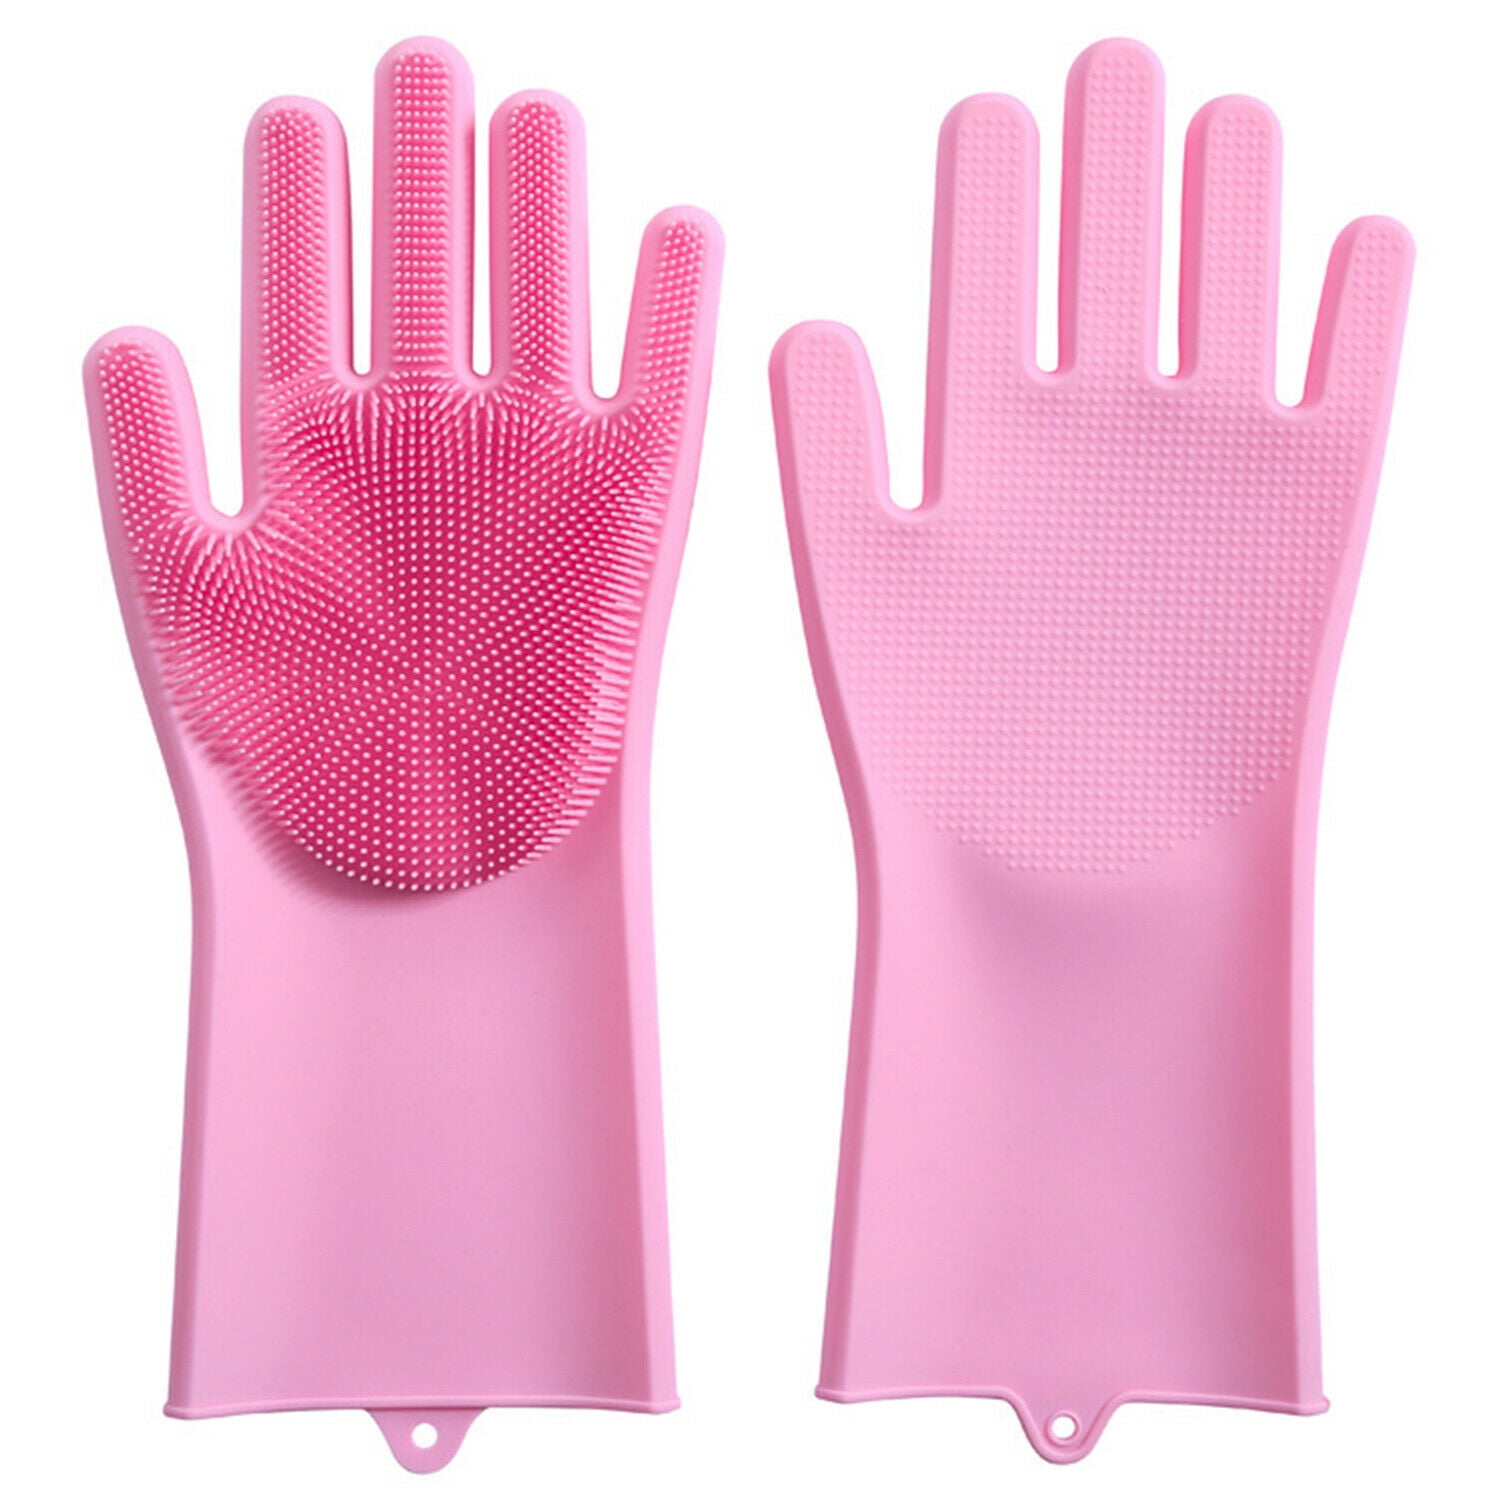 Scrub Buddies Ladies Kitchen Bathroom Dishes Floors All Purpose Cleaning  Gloves Pink 2 Pack